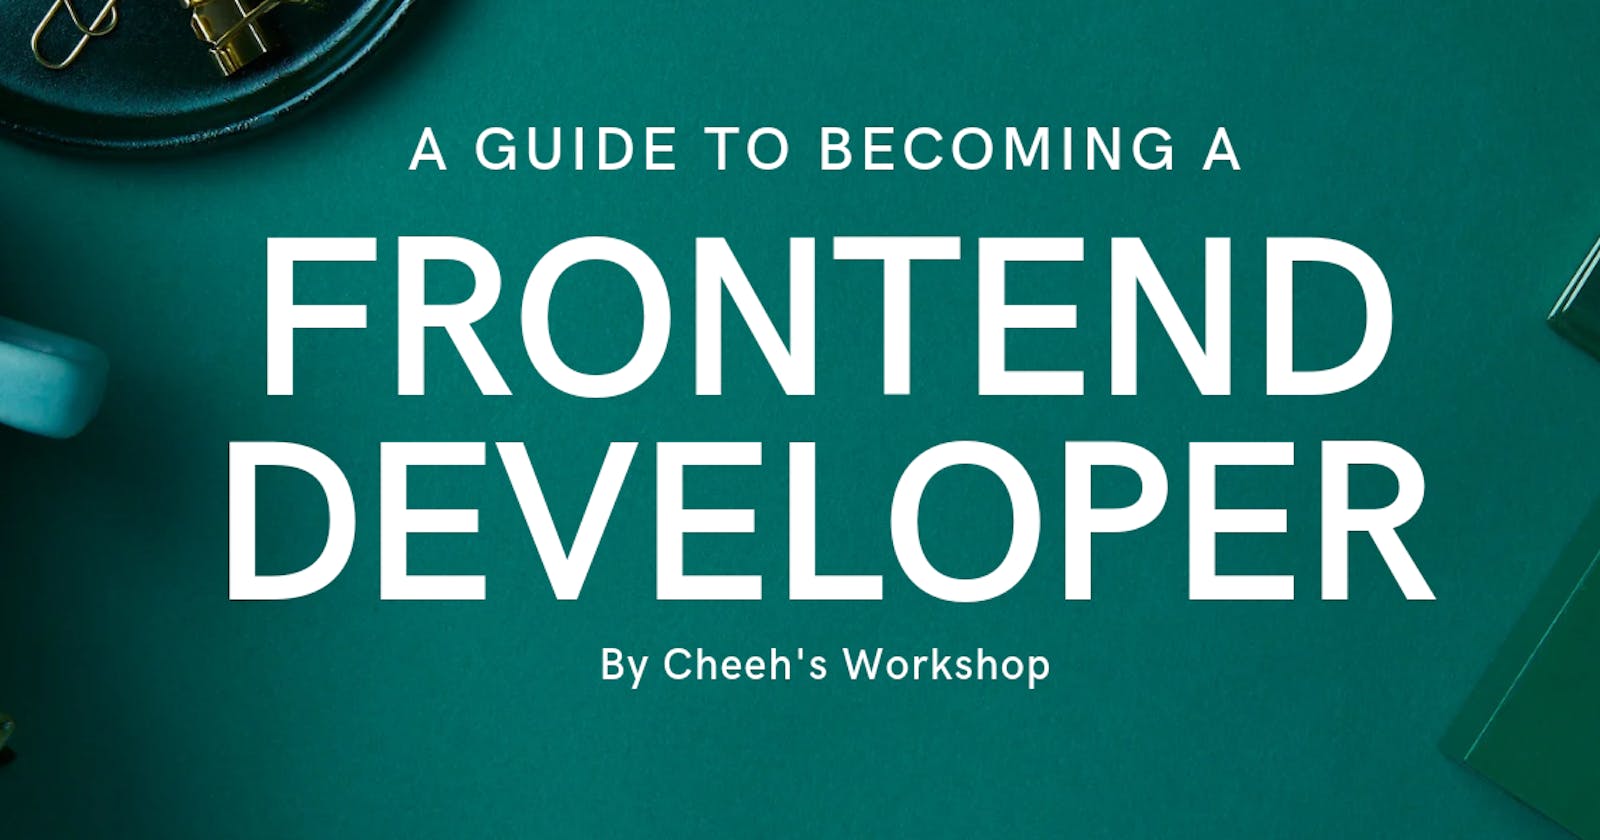 A Guide To Becoming A Frontend Developer.